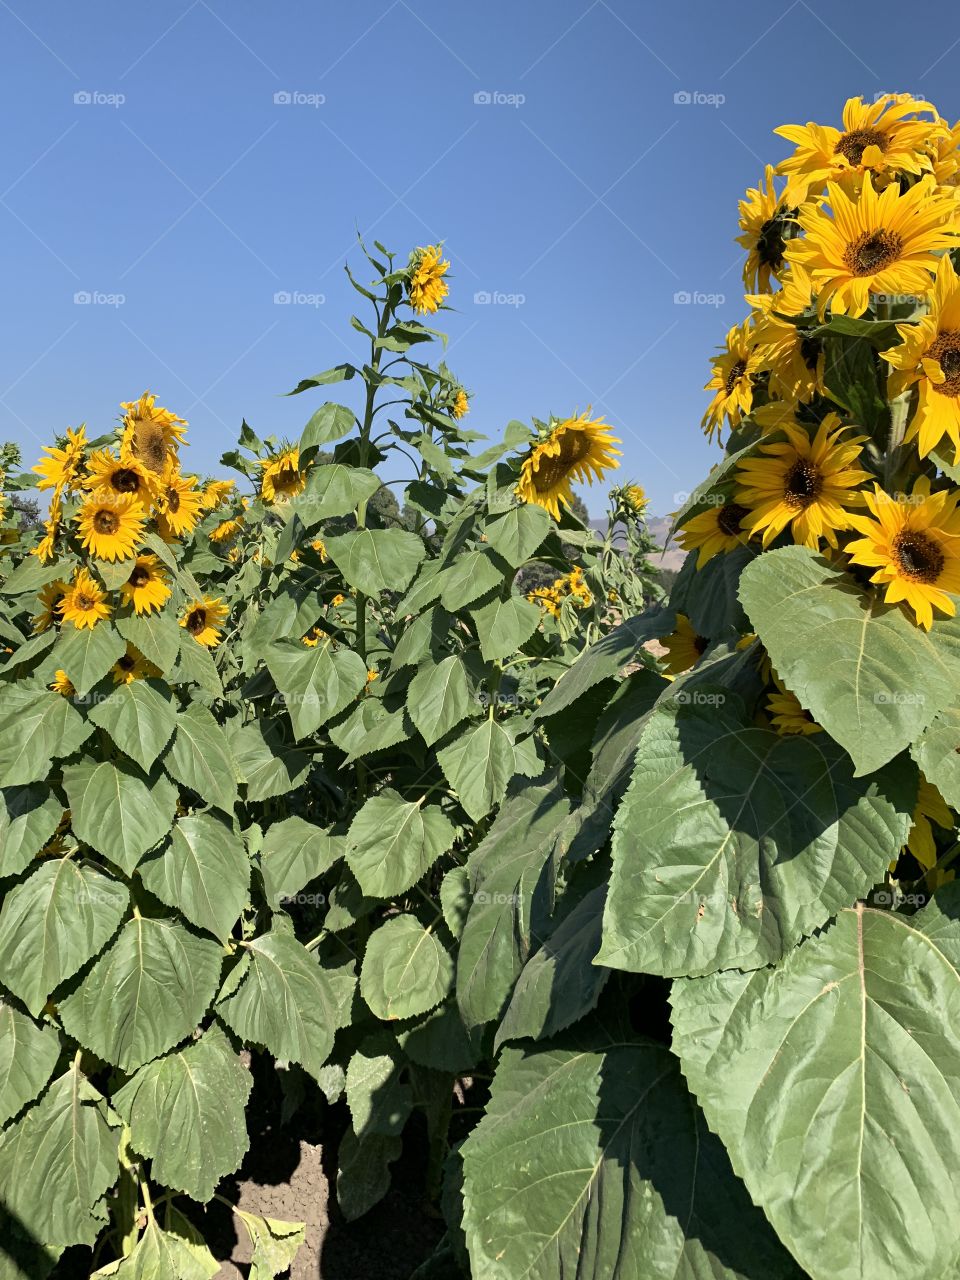 A field of beautiful, vibrant yellow sunflowers under a blue sky 